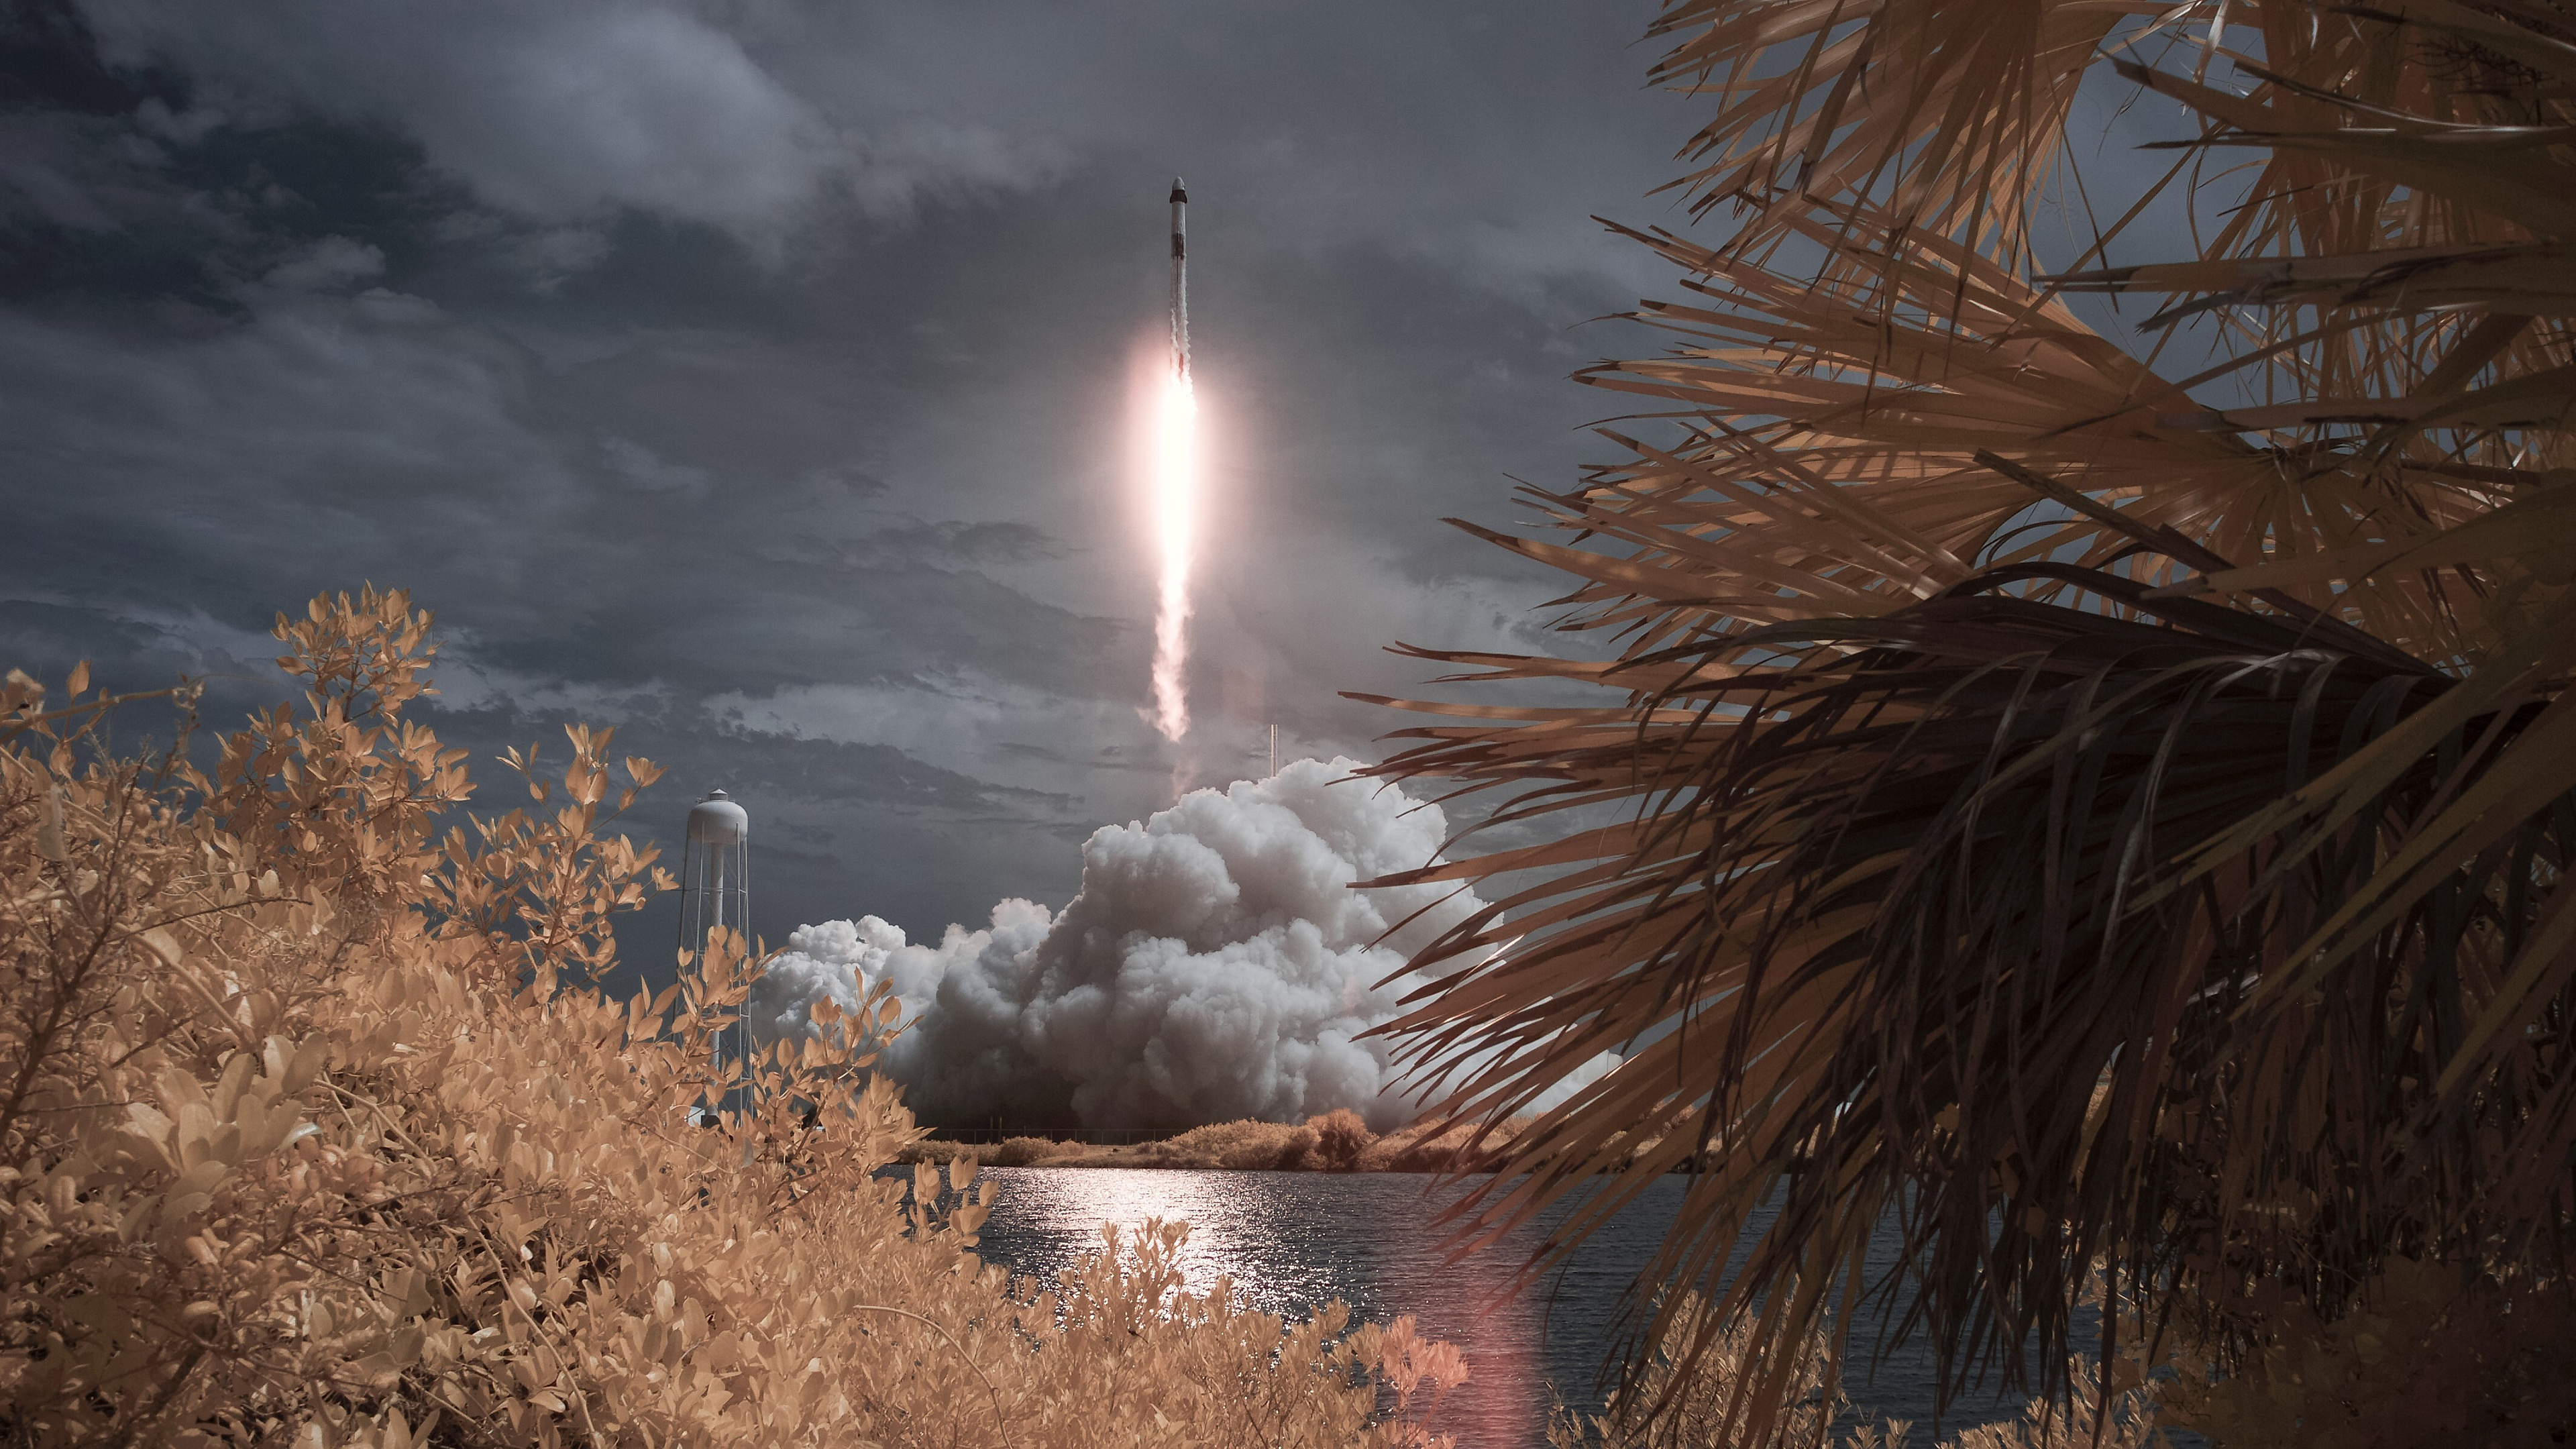 falcon 9, spacex, technology, infrared, rocket